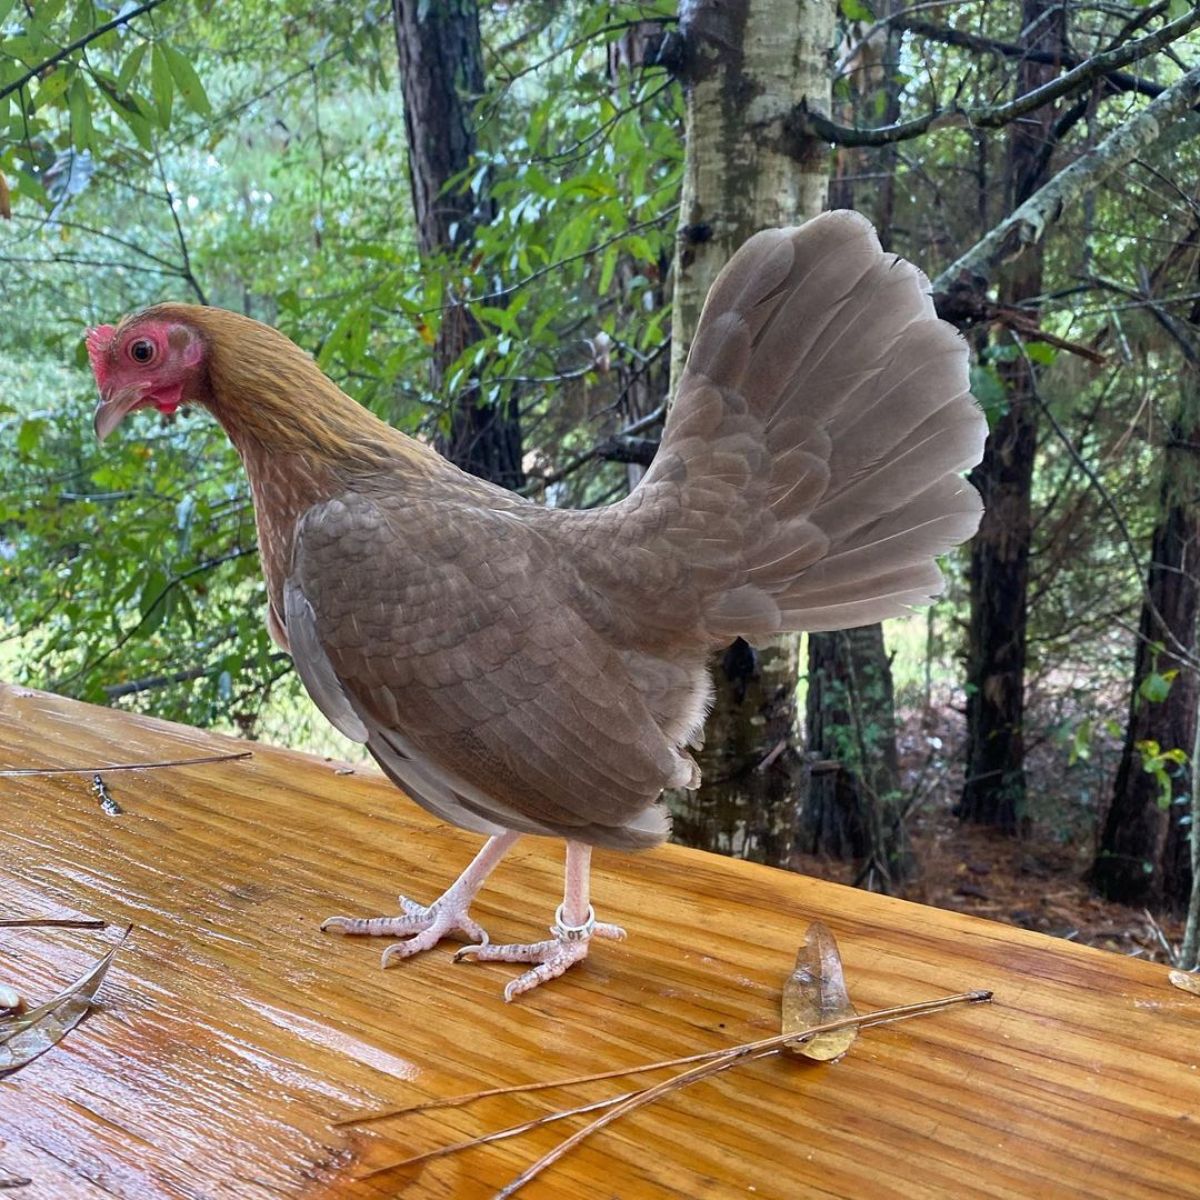 An adorable Old English Game hen standing on a wooden board.